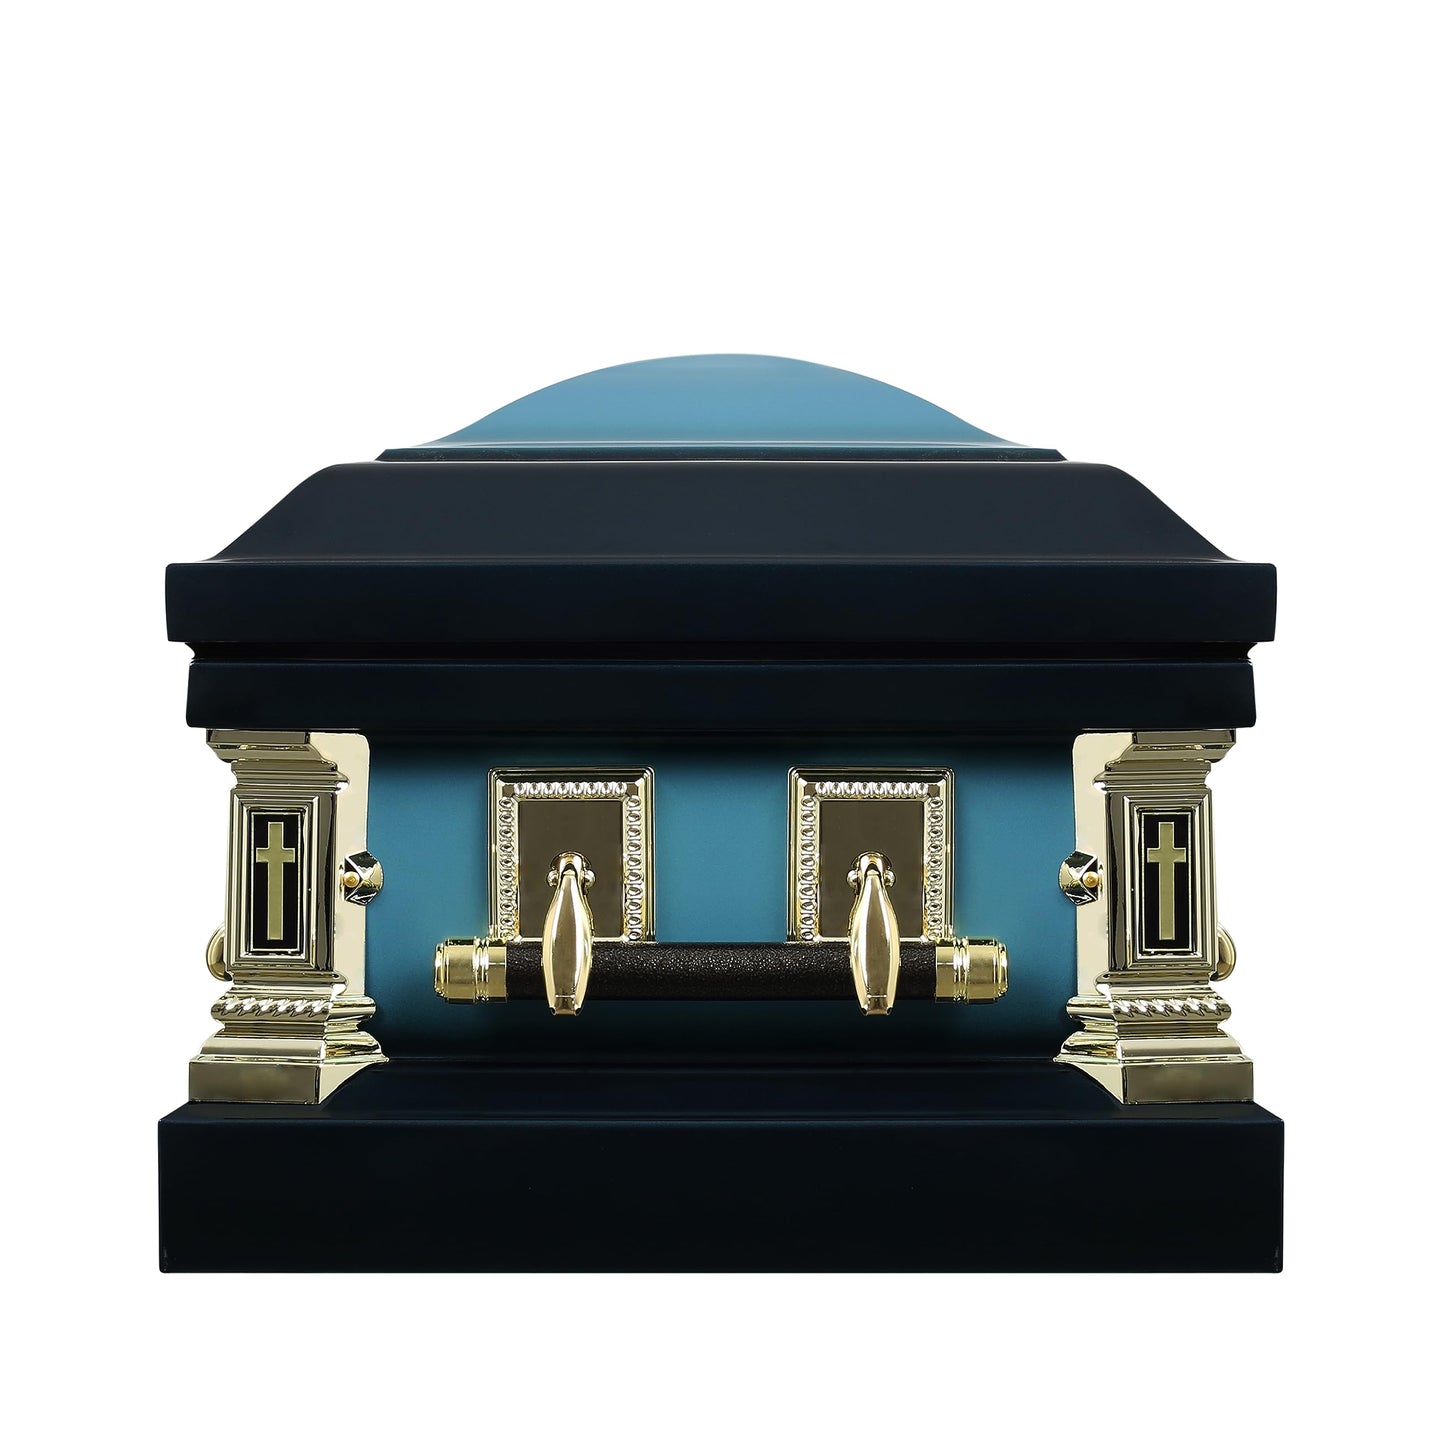 Overnight Caskets in God's Care Metal Funeral Casket with Blue Velvet Interior - 18 Gauge Steel - Fully Appointed Adult Casket - Coffin Featuring Velvet Interior Lining with Pillow and Throw Set